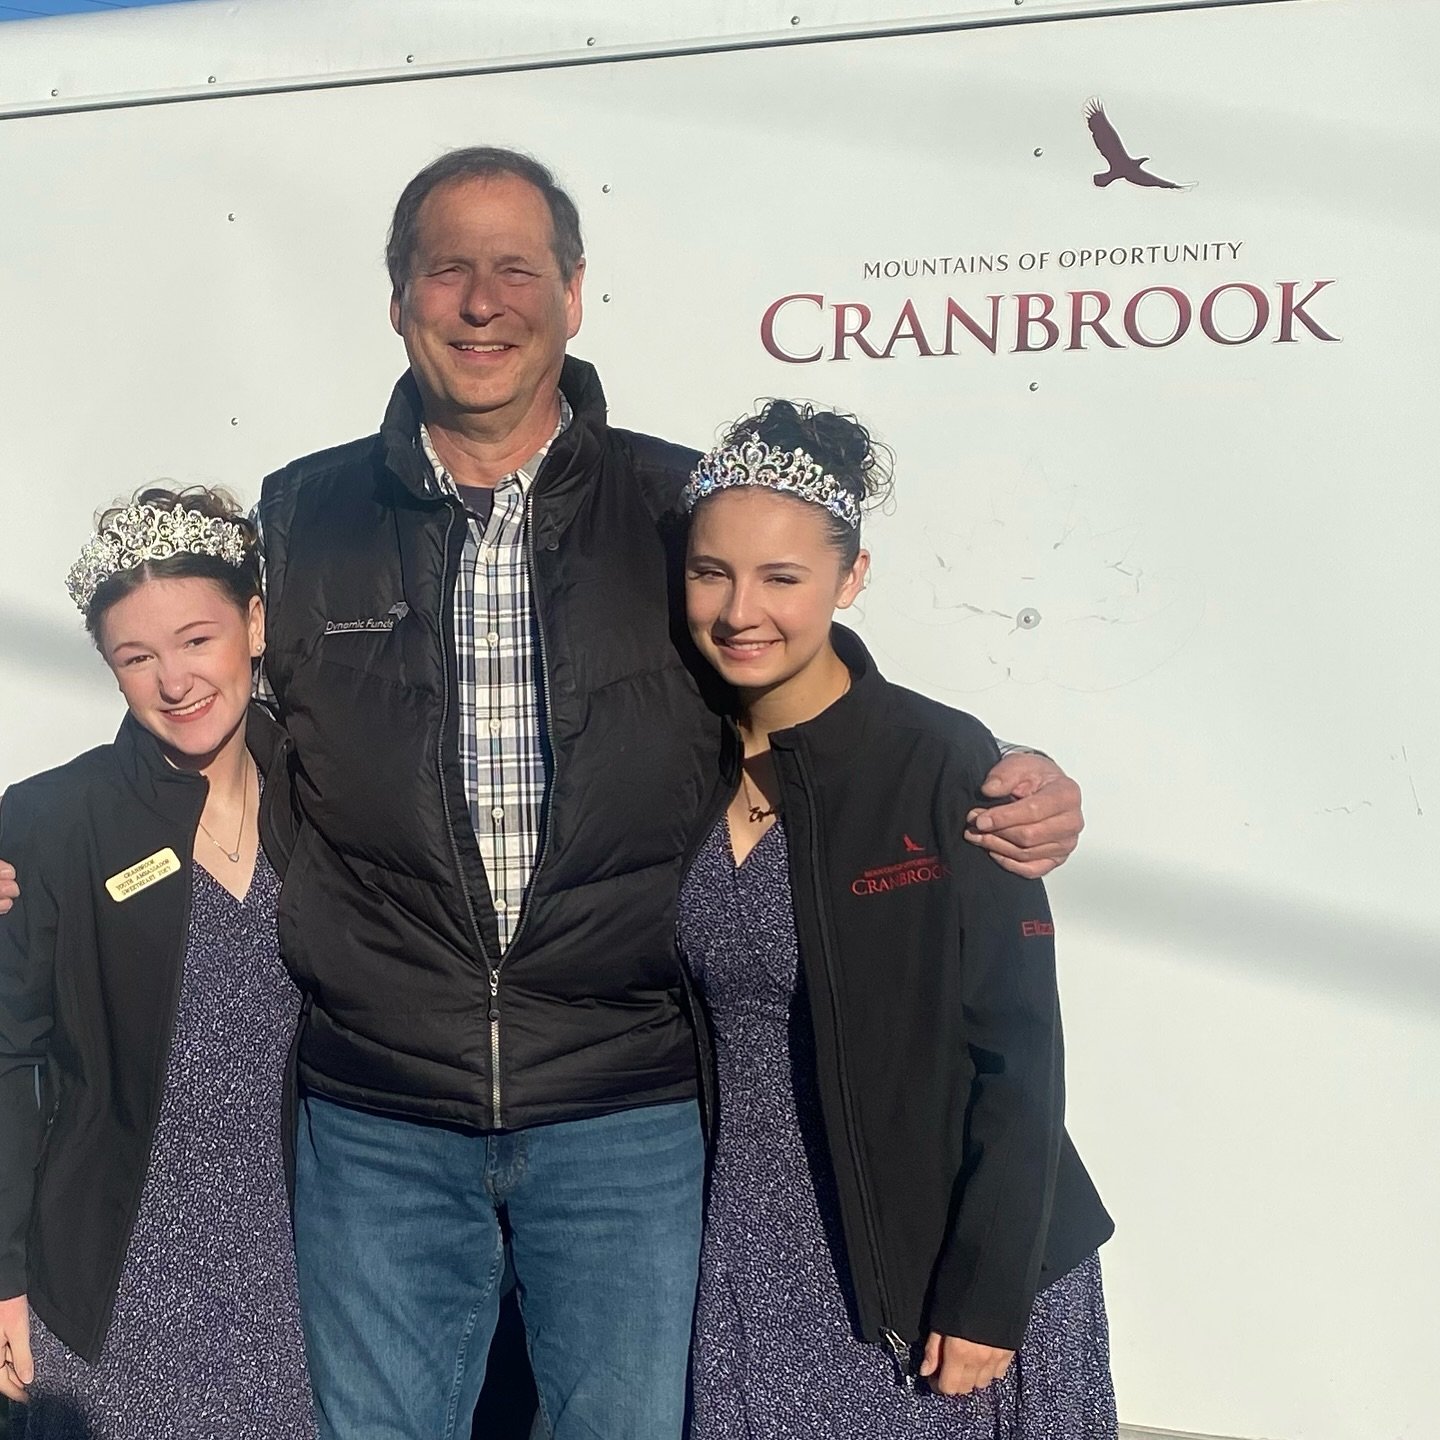 The float is loaded and our one-and-only float driver is geared up and ready to roll as we head over to celebrate the Blossom Festival in Creston today! See you on the parade route Creston!!
#cranbrookyouthambassadors #welovecranbrook #cranbrookbc